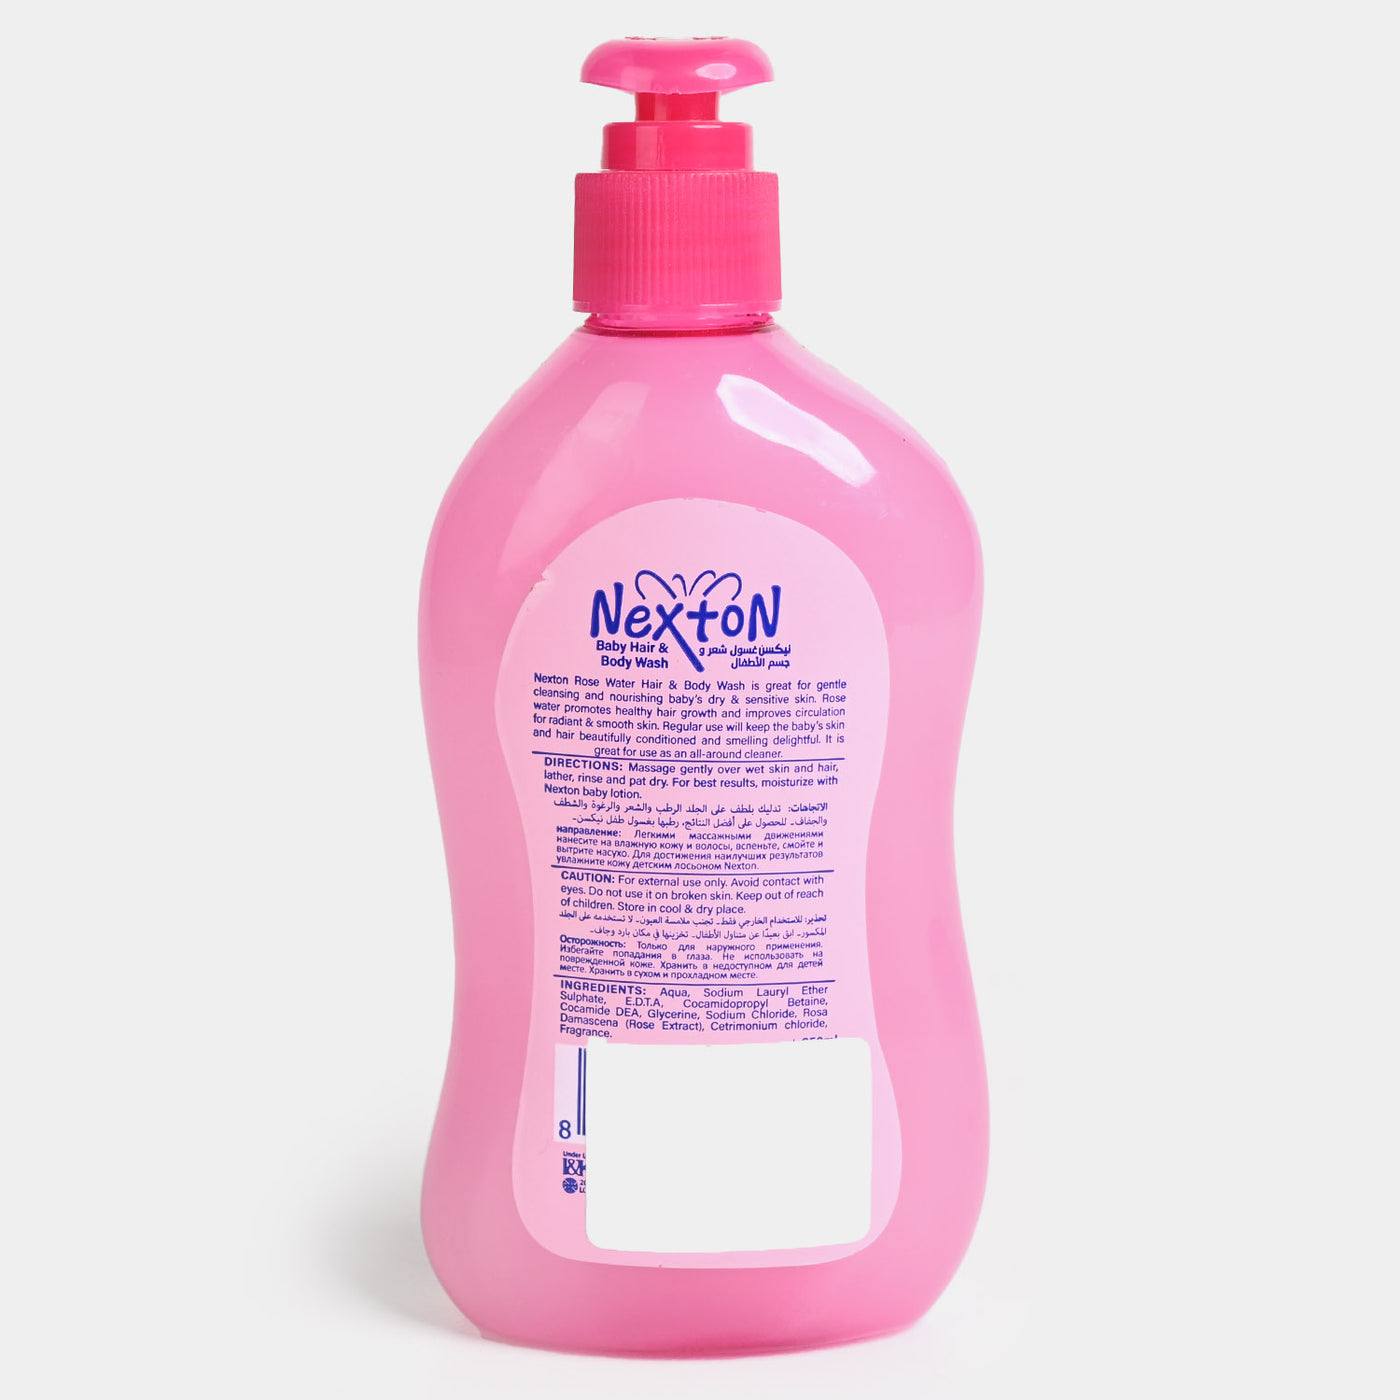 Nexton Baby Hair and Body wash (3-in-1) | 250ML